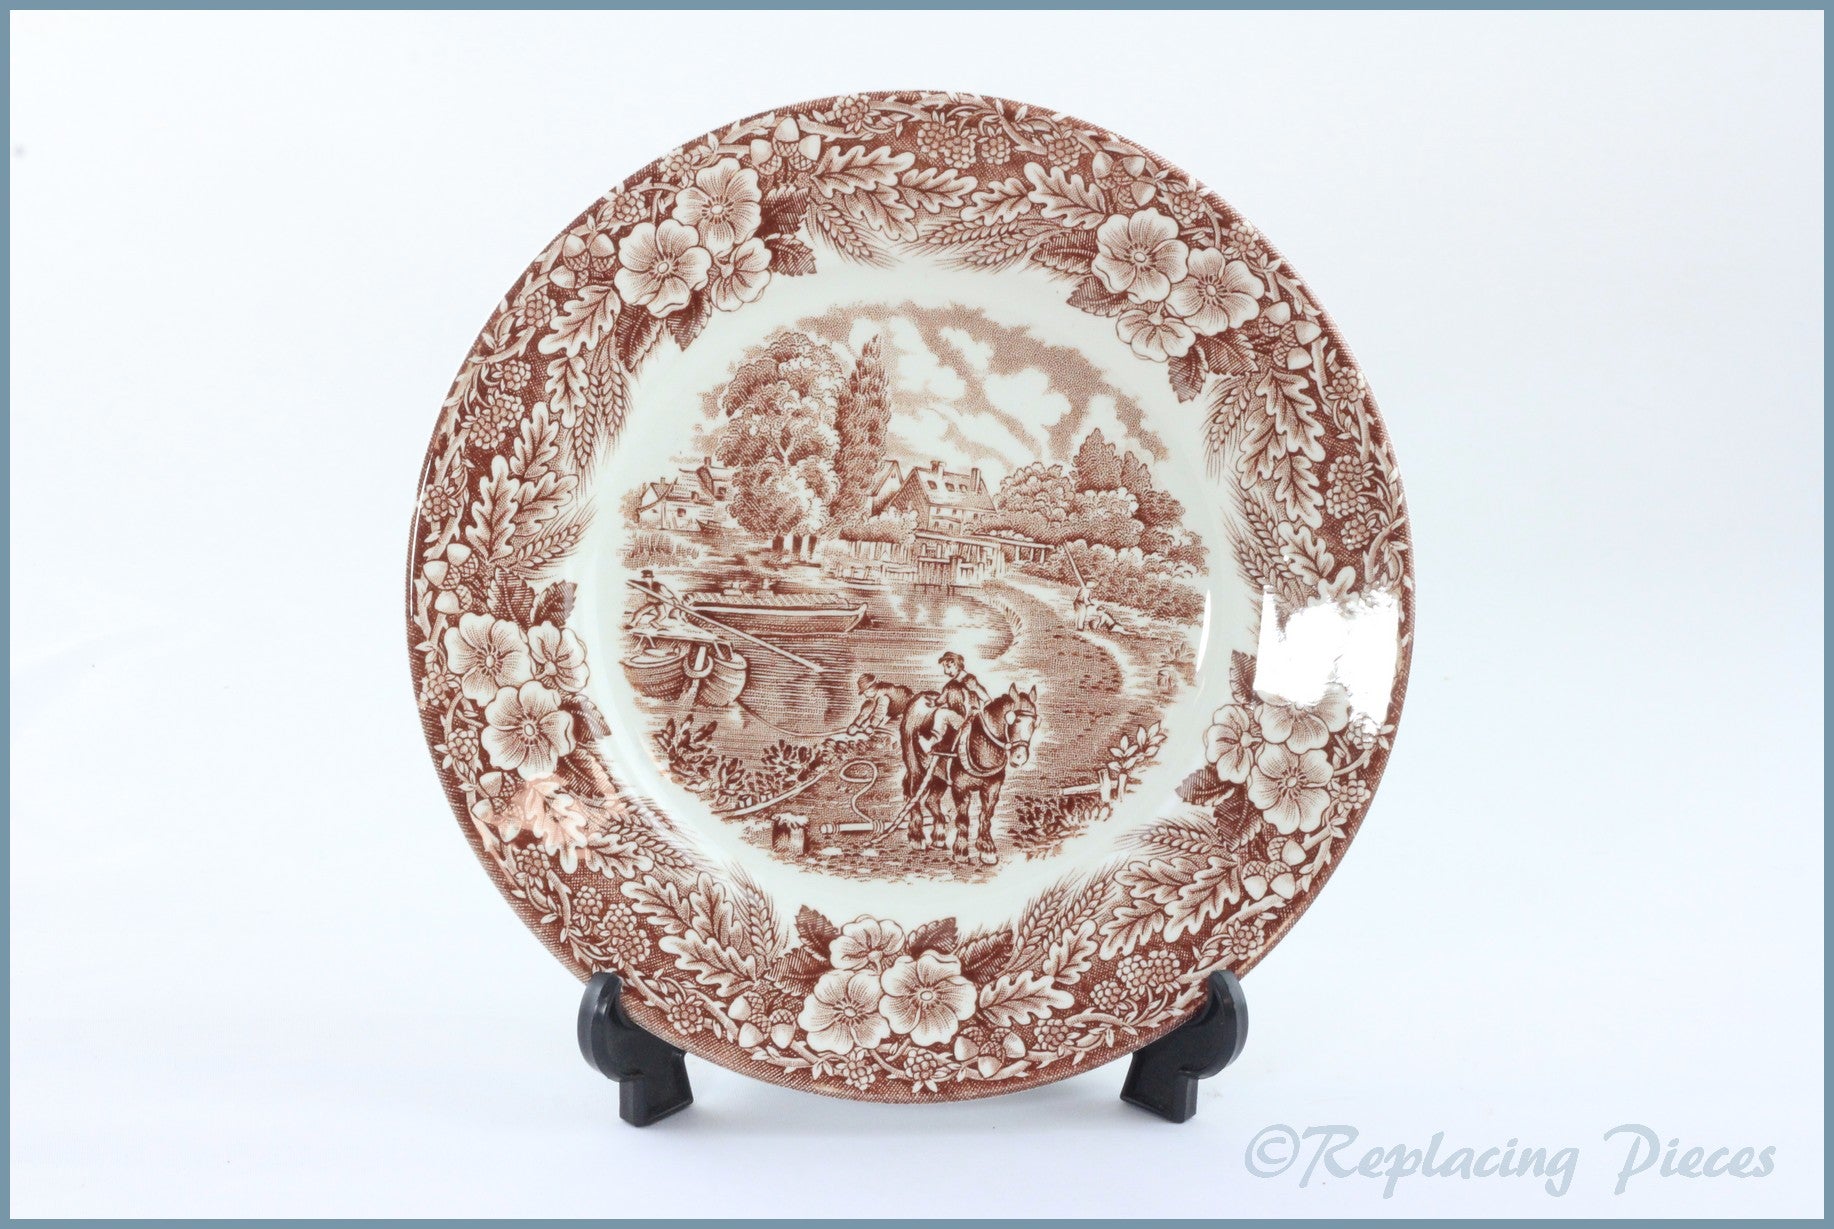 Broadhurst - The Constable Series (Brown) - 6 3/4" Side Plate